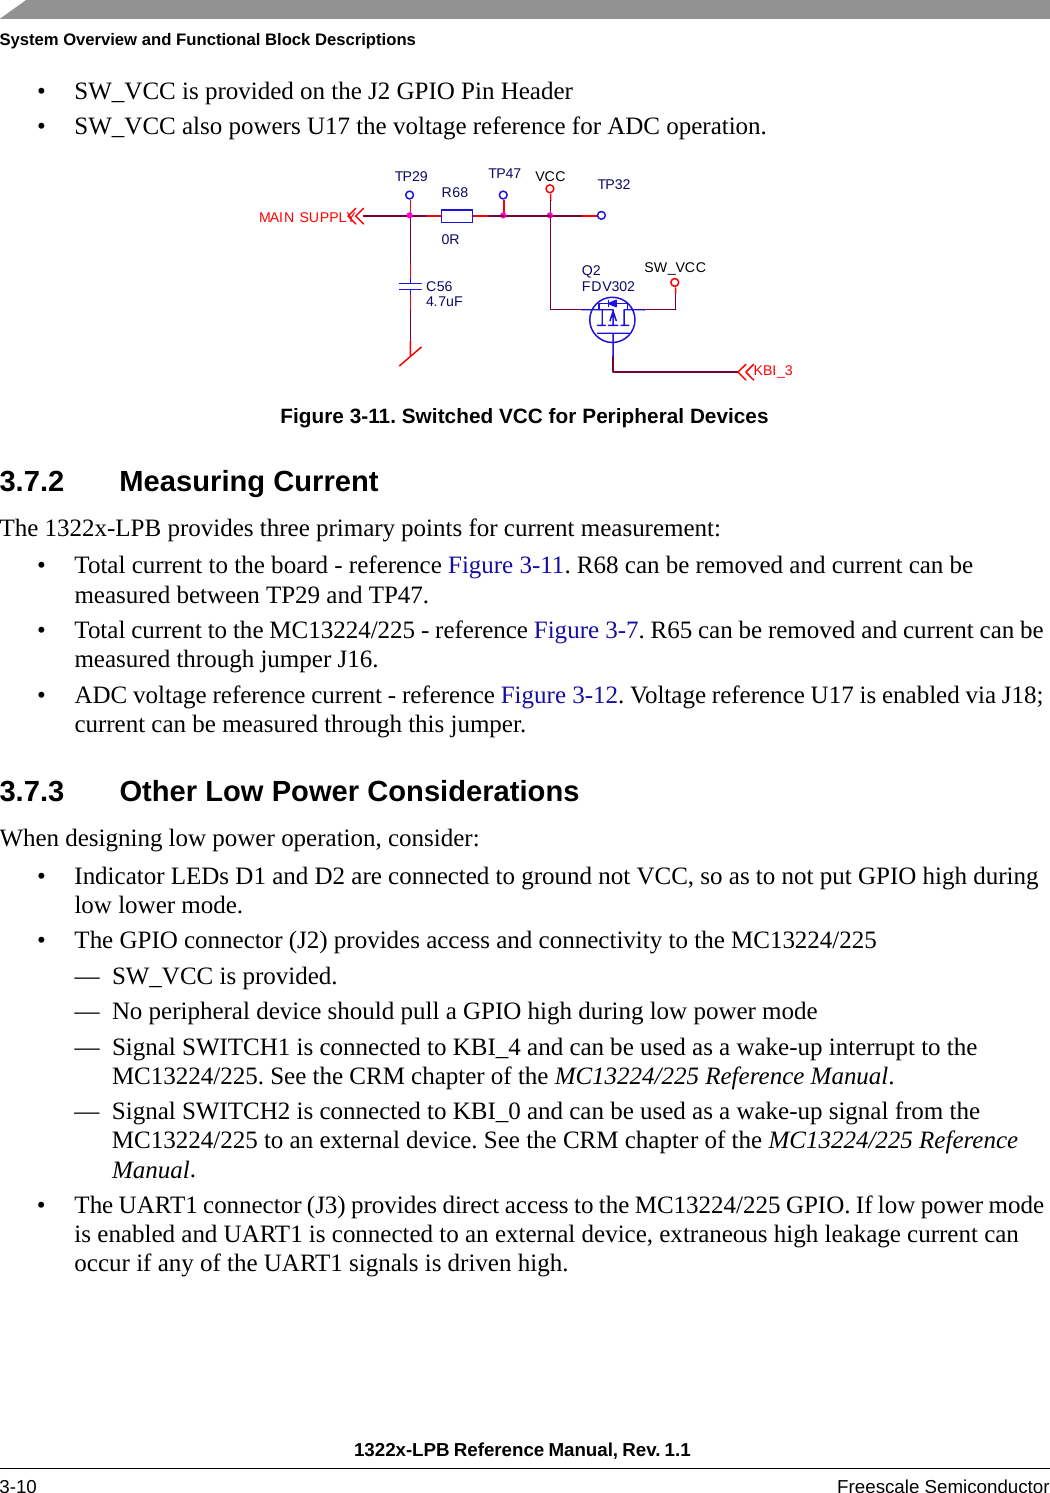 System Overview and Functional Block Descriptions1322x-LPB Reference Manual, Rev. 1.1 3-10 Freescale Semiconductor• SW_VCC is provided on the J2 GPIO Pin Header• SW_VCC also powers U17 the voltage reference for ADC operation.Figure 3-11. Switched VCC for Peripheral Devices3.7.2 Measuring CurrentThe 1322x-LPB provides three primary points for current measurement:• Total current to the board - reference Figure 3-11. R68 can be removed and current can be measured between TP29 and TP47.• Total current to the MC13224/225 - reference Figure 3-7. R65 can be removed and current can be measured through jumper J16.• ADC voltage reference current - reference Figure 3-12. Voltage reference U17 is enabled via J18; current can be measured through this jumper.3.7.3 Other Low Power ConsiderationsWhen designing low power operation, consider:• Indicator LEDs D1 and D2 are connected to ground not VCC, so as to not put GPIO high during low lower mode.• The GPIO connector (J2) provides access and connectivity to the MC13224/225— SW_VCC is provided.— No peripheral device should pull a GPIO high during low power mode— Signal SWITCH1 is connected to KBI_4 and can be used as a wake-up interrupt to the MC13224/225. See the CRM chapter of the MC13224/225 Reference Manual.— Signal SWITCH2 is connected to KBI_0 and can be used as a wake-up signal from the MC13224/225 to an external device. See the CRM chapter of the MC13224/225 Reference Manual.• The UART1 connector (J3) provides direct access to the MC13224/225 GPIO. If low power mode is enabled and UART1 is connected to an external device, extraneous high leakage current can occur if any of the UART1 signals is driven high.KBI_3SW_VCCTP32R680RTP47 VCCTP29C564.7uFQ2FDV302MAIN SUPPLY